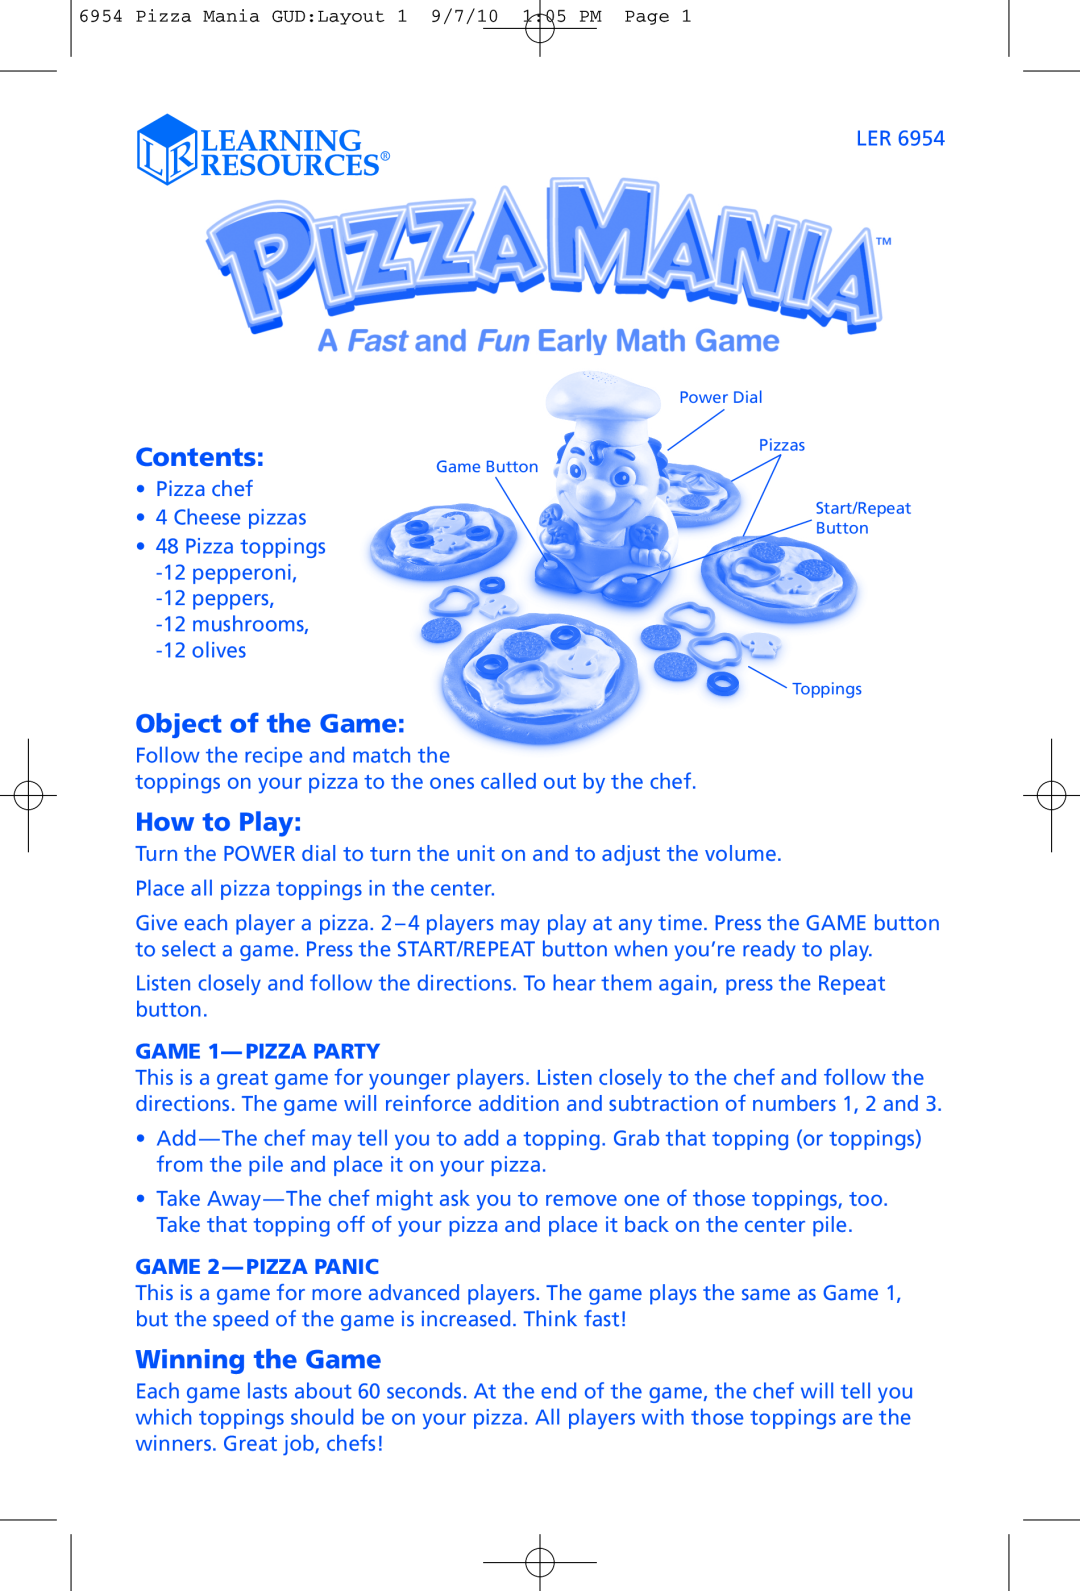 Learning Resources LER 6954 manual GAME 1- PIZZA PARTY, GAME 2- PIZZA PANIC, Contents, Object of the Game, How to Play 